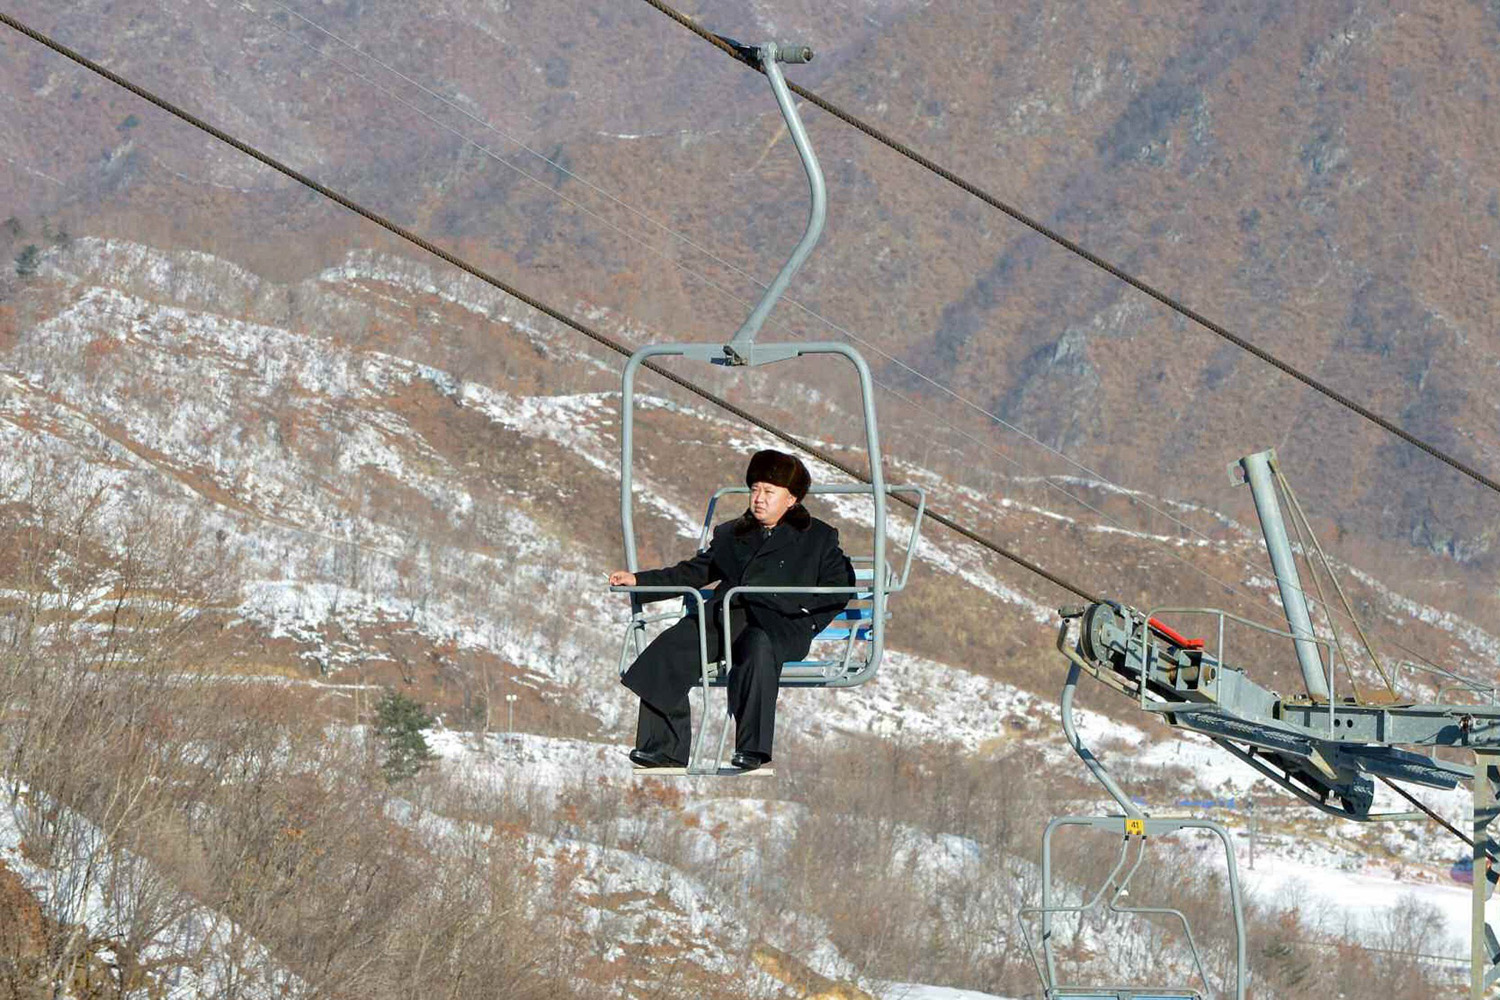 North Korean leader Kim Jong Un sits on a ski lift during a visit to a newly built ski resort in the Masik Pass region